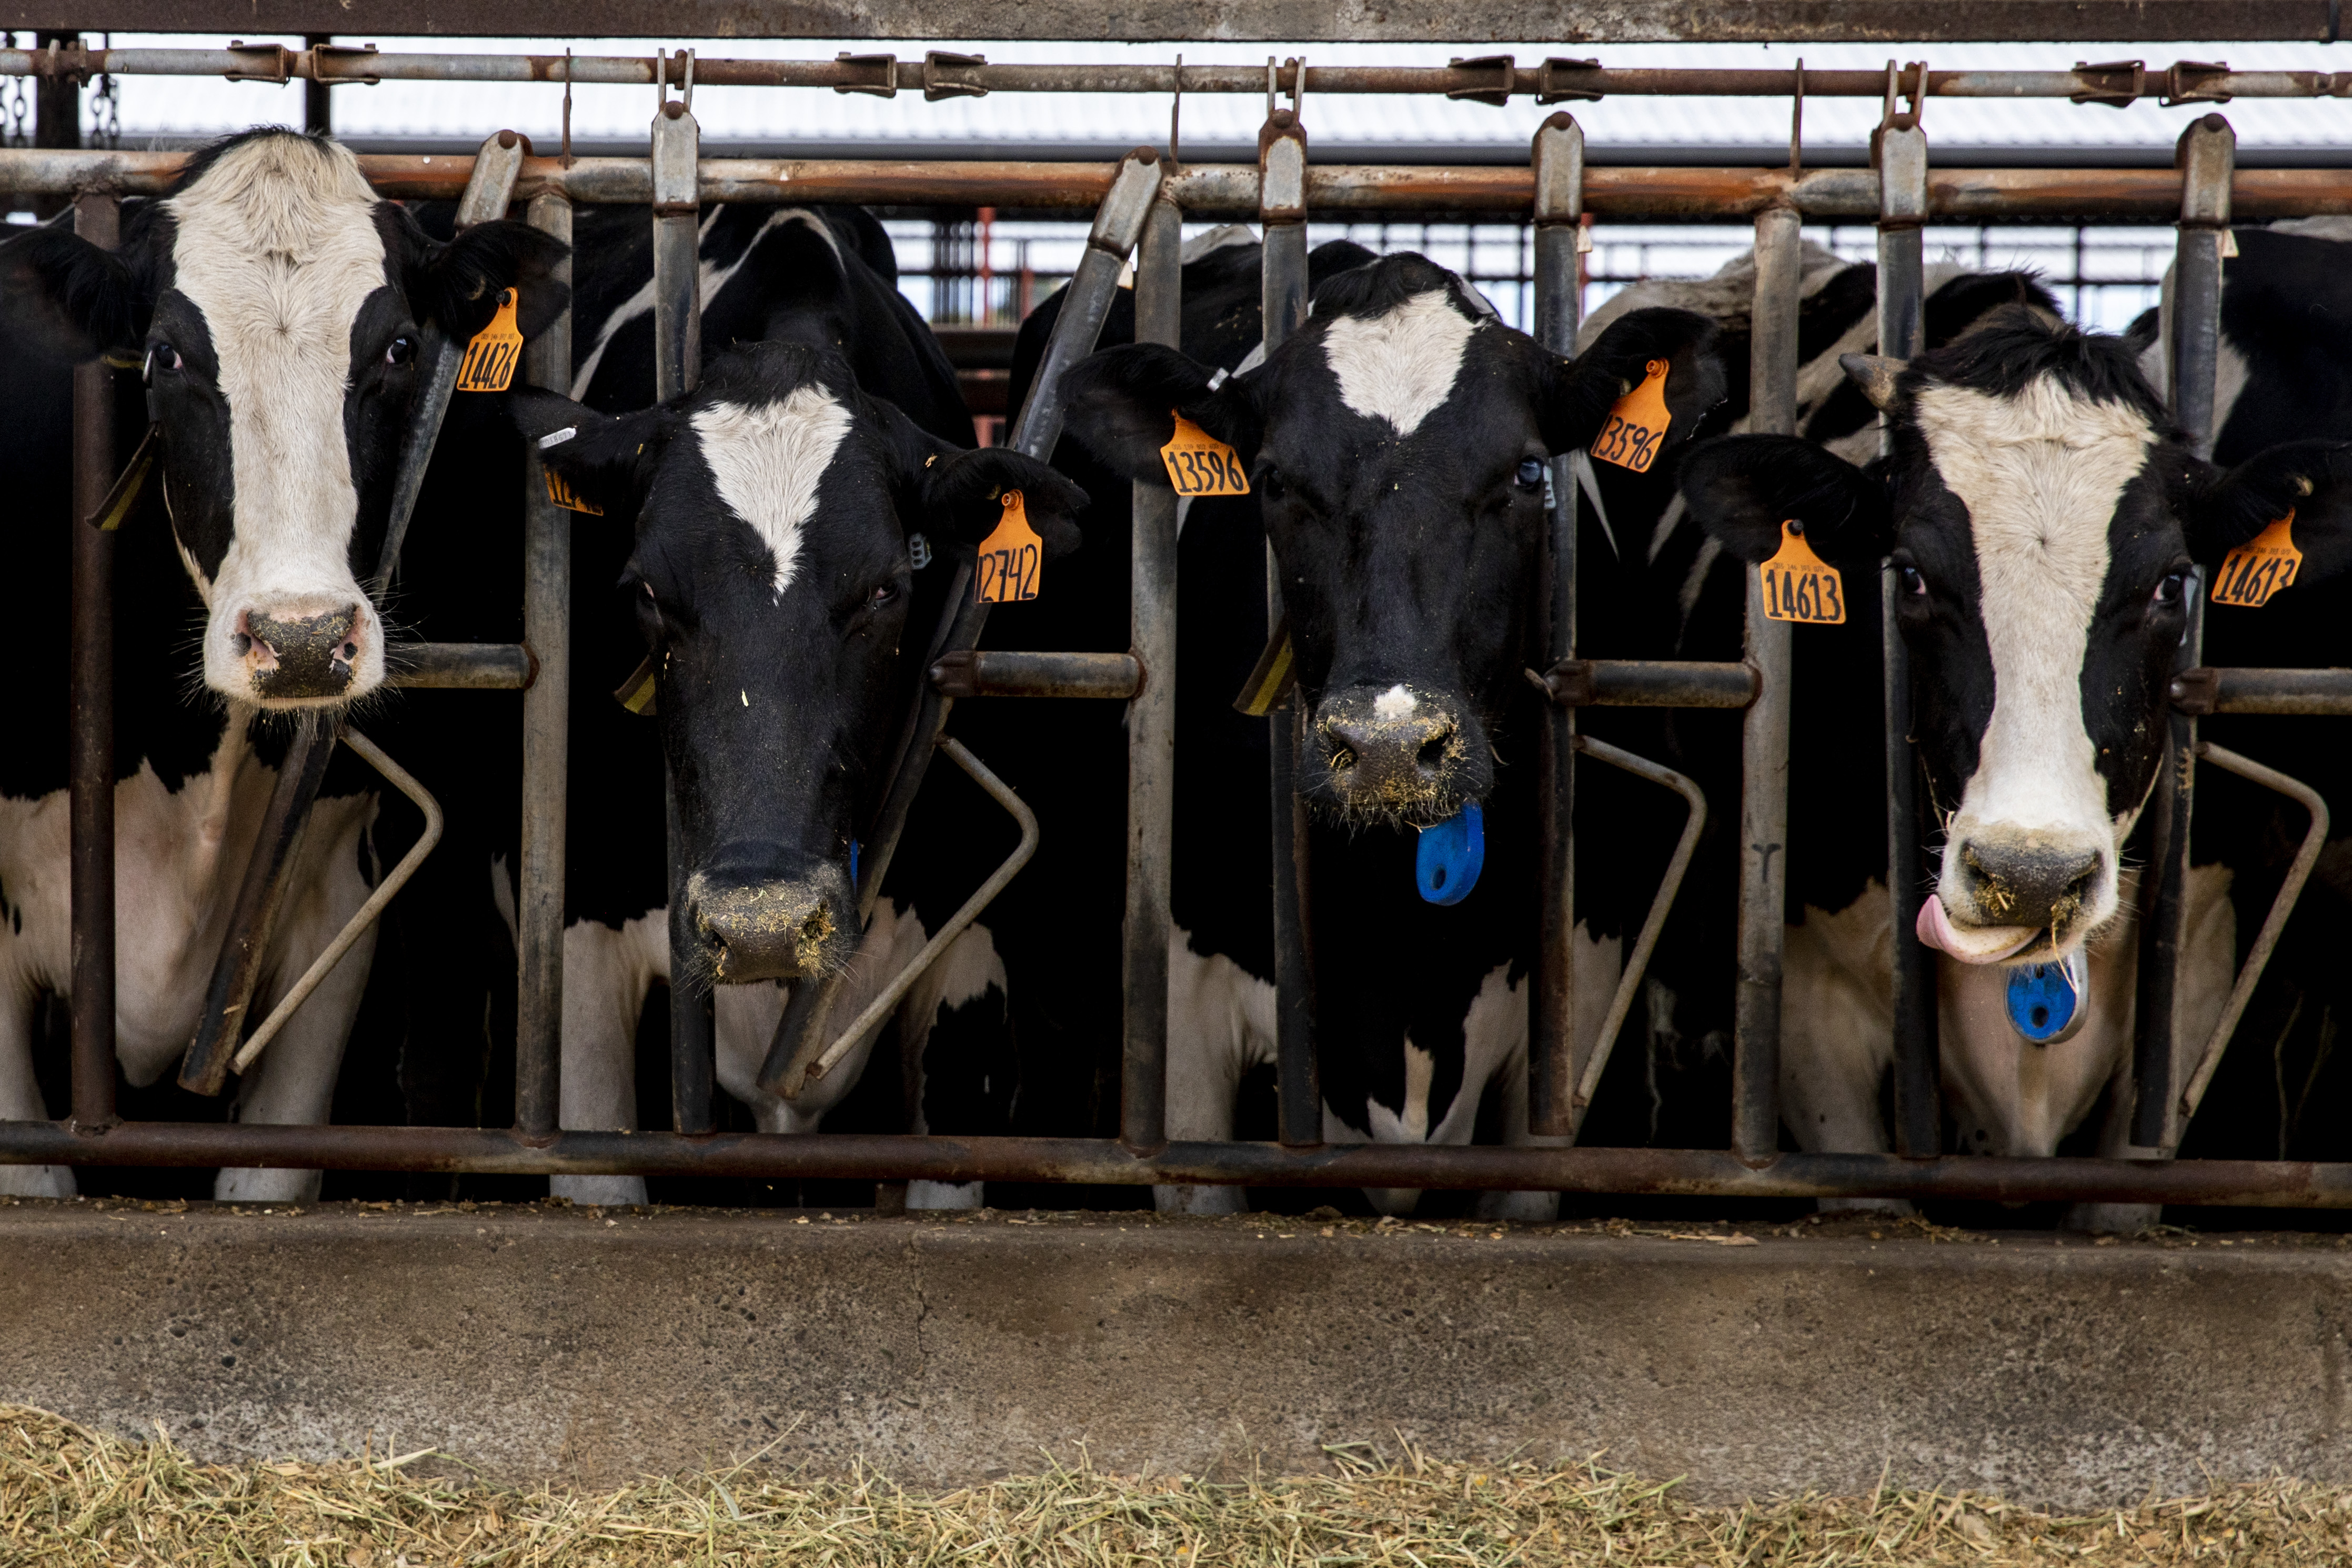 Black and white spotted dairy cows with numbered orange ear tags lean their heads out of barred stalls.